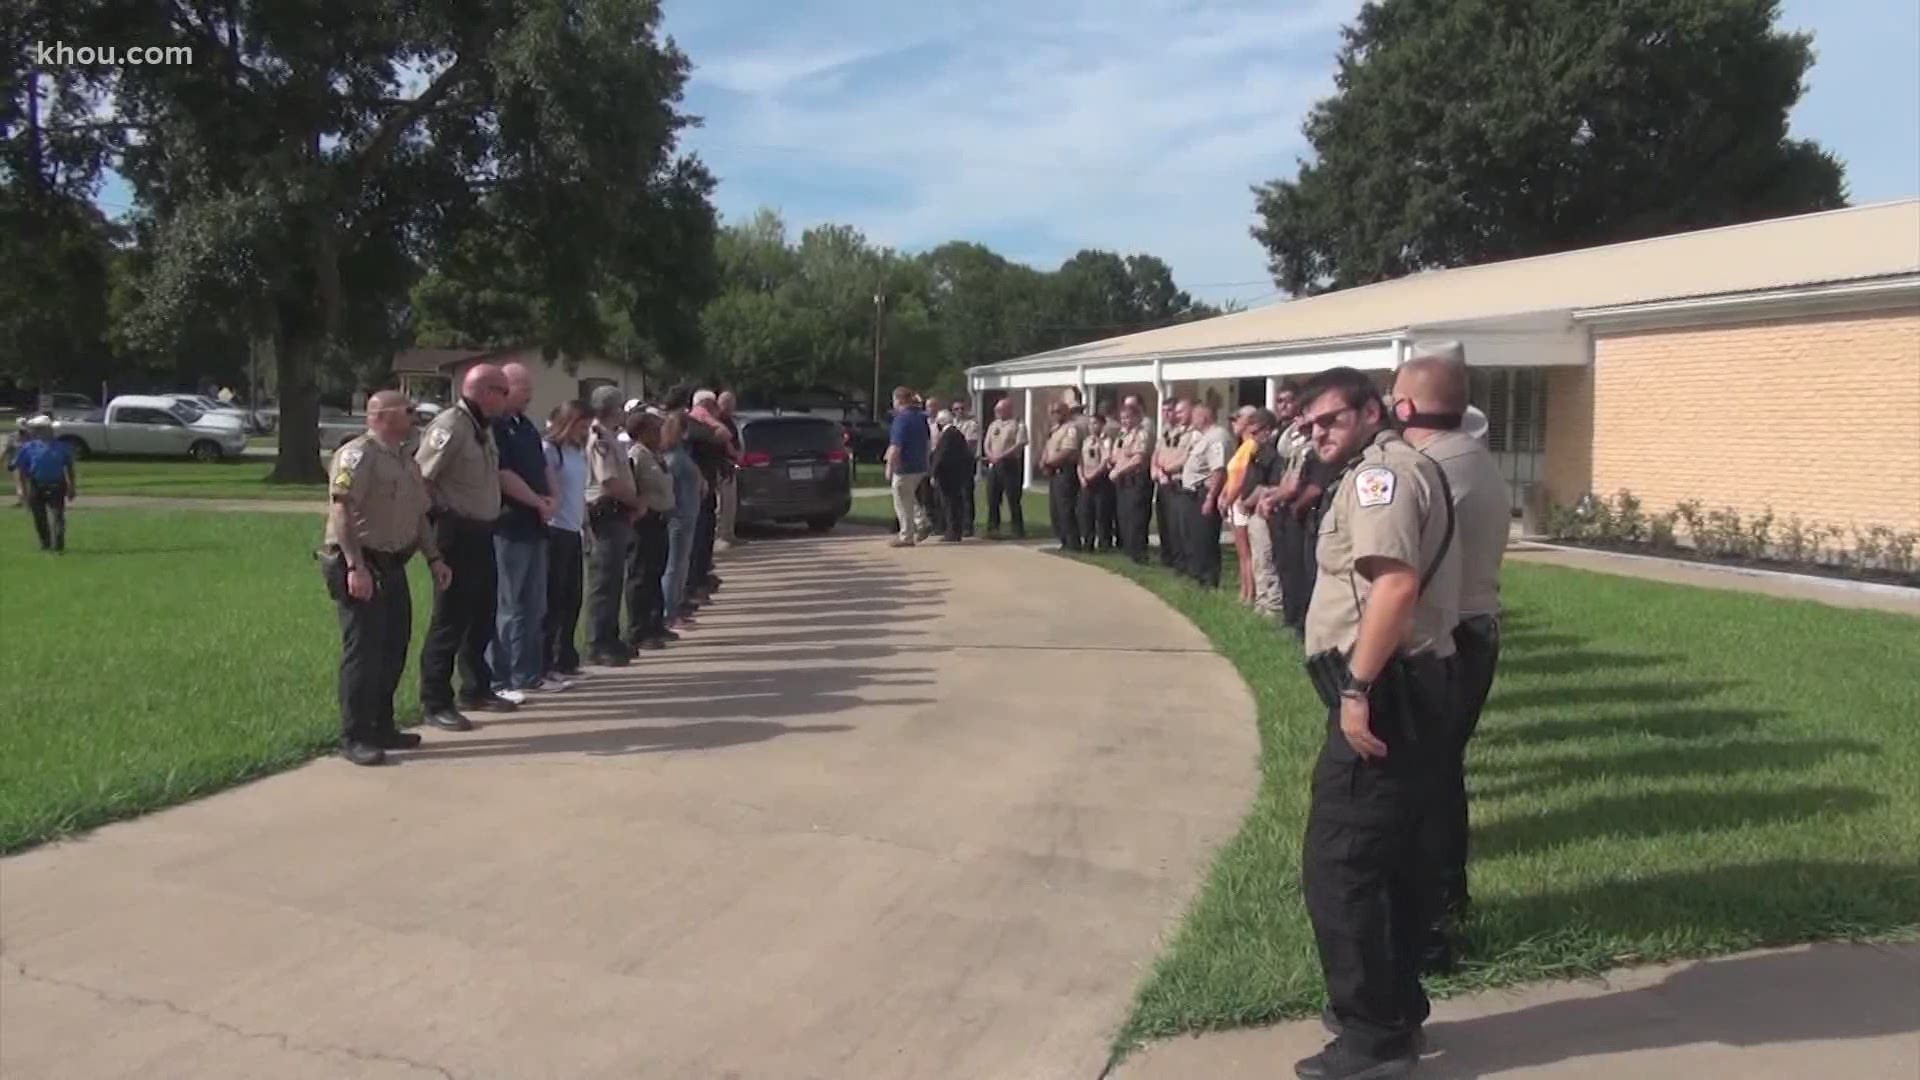 About 100 deputies took part in a procession for Waller County Sheriff Glenn Smith who died of an apparent heart attack.